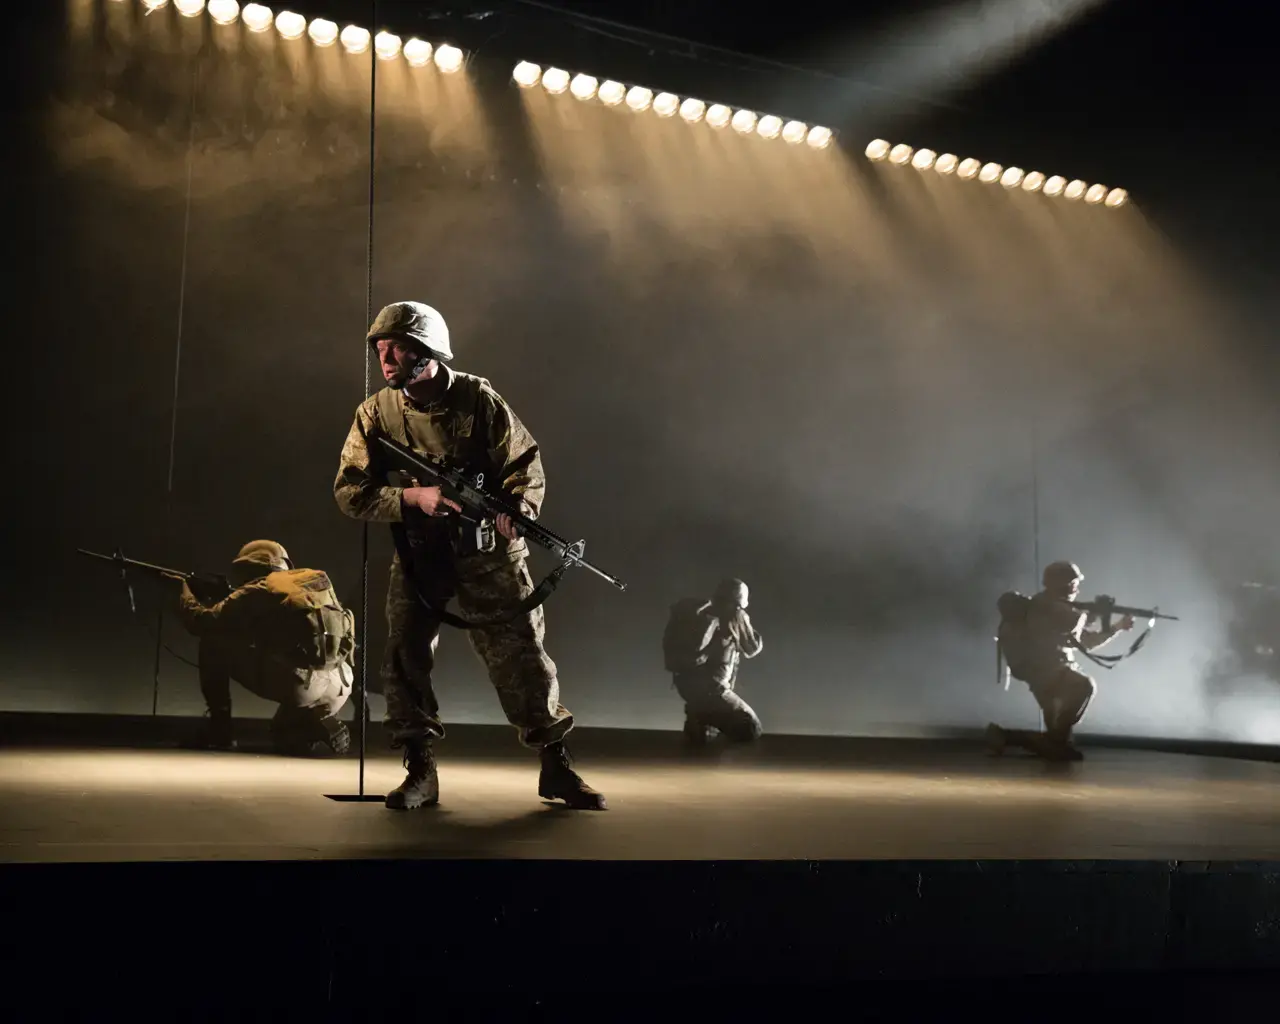 Keith J. Conallen in Don Juan Comes Home from Iraq. Photo by Alexander Iziliaev.